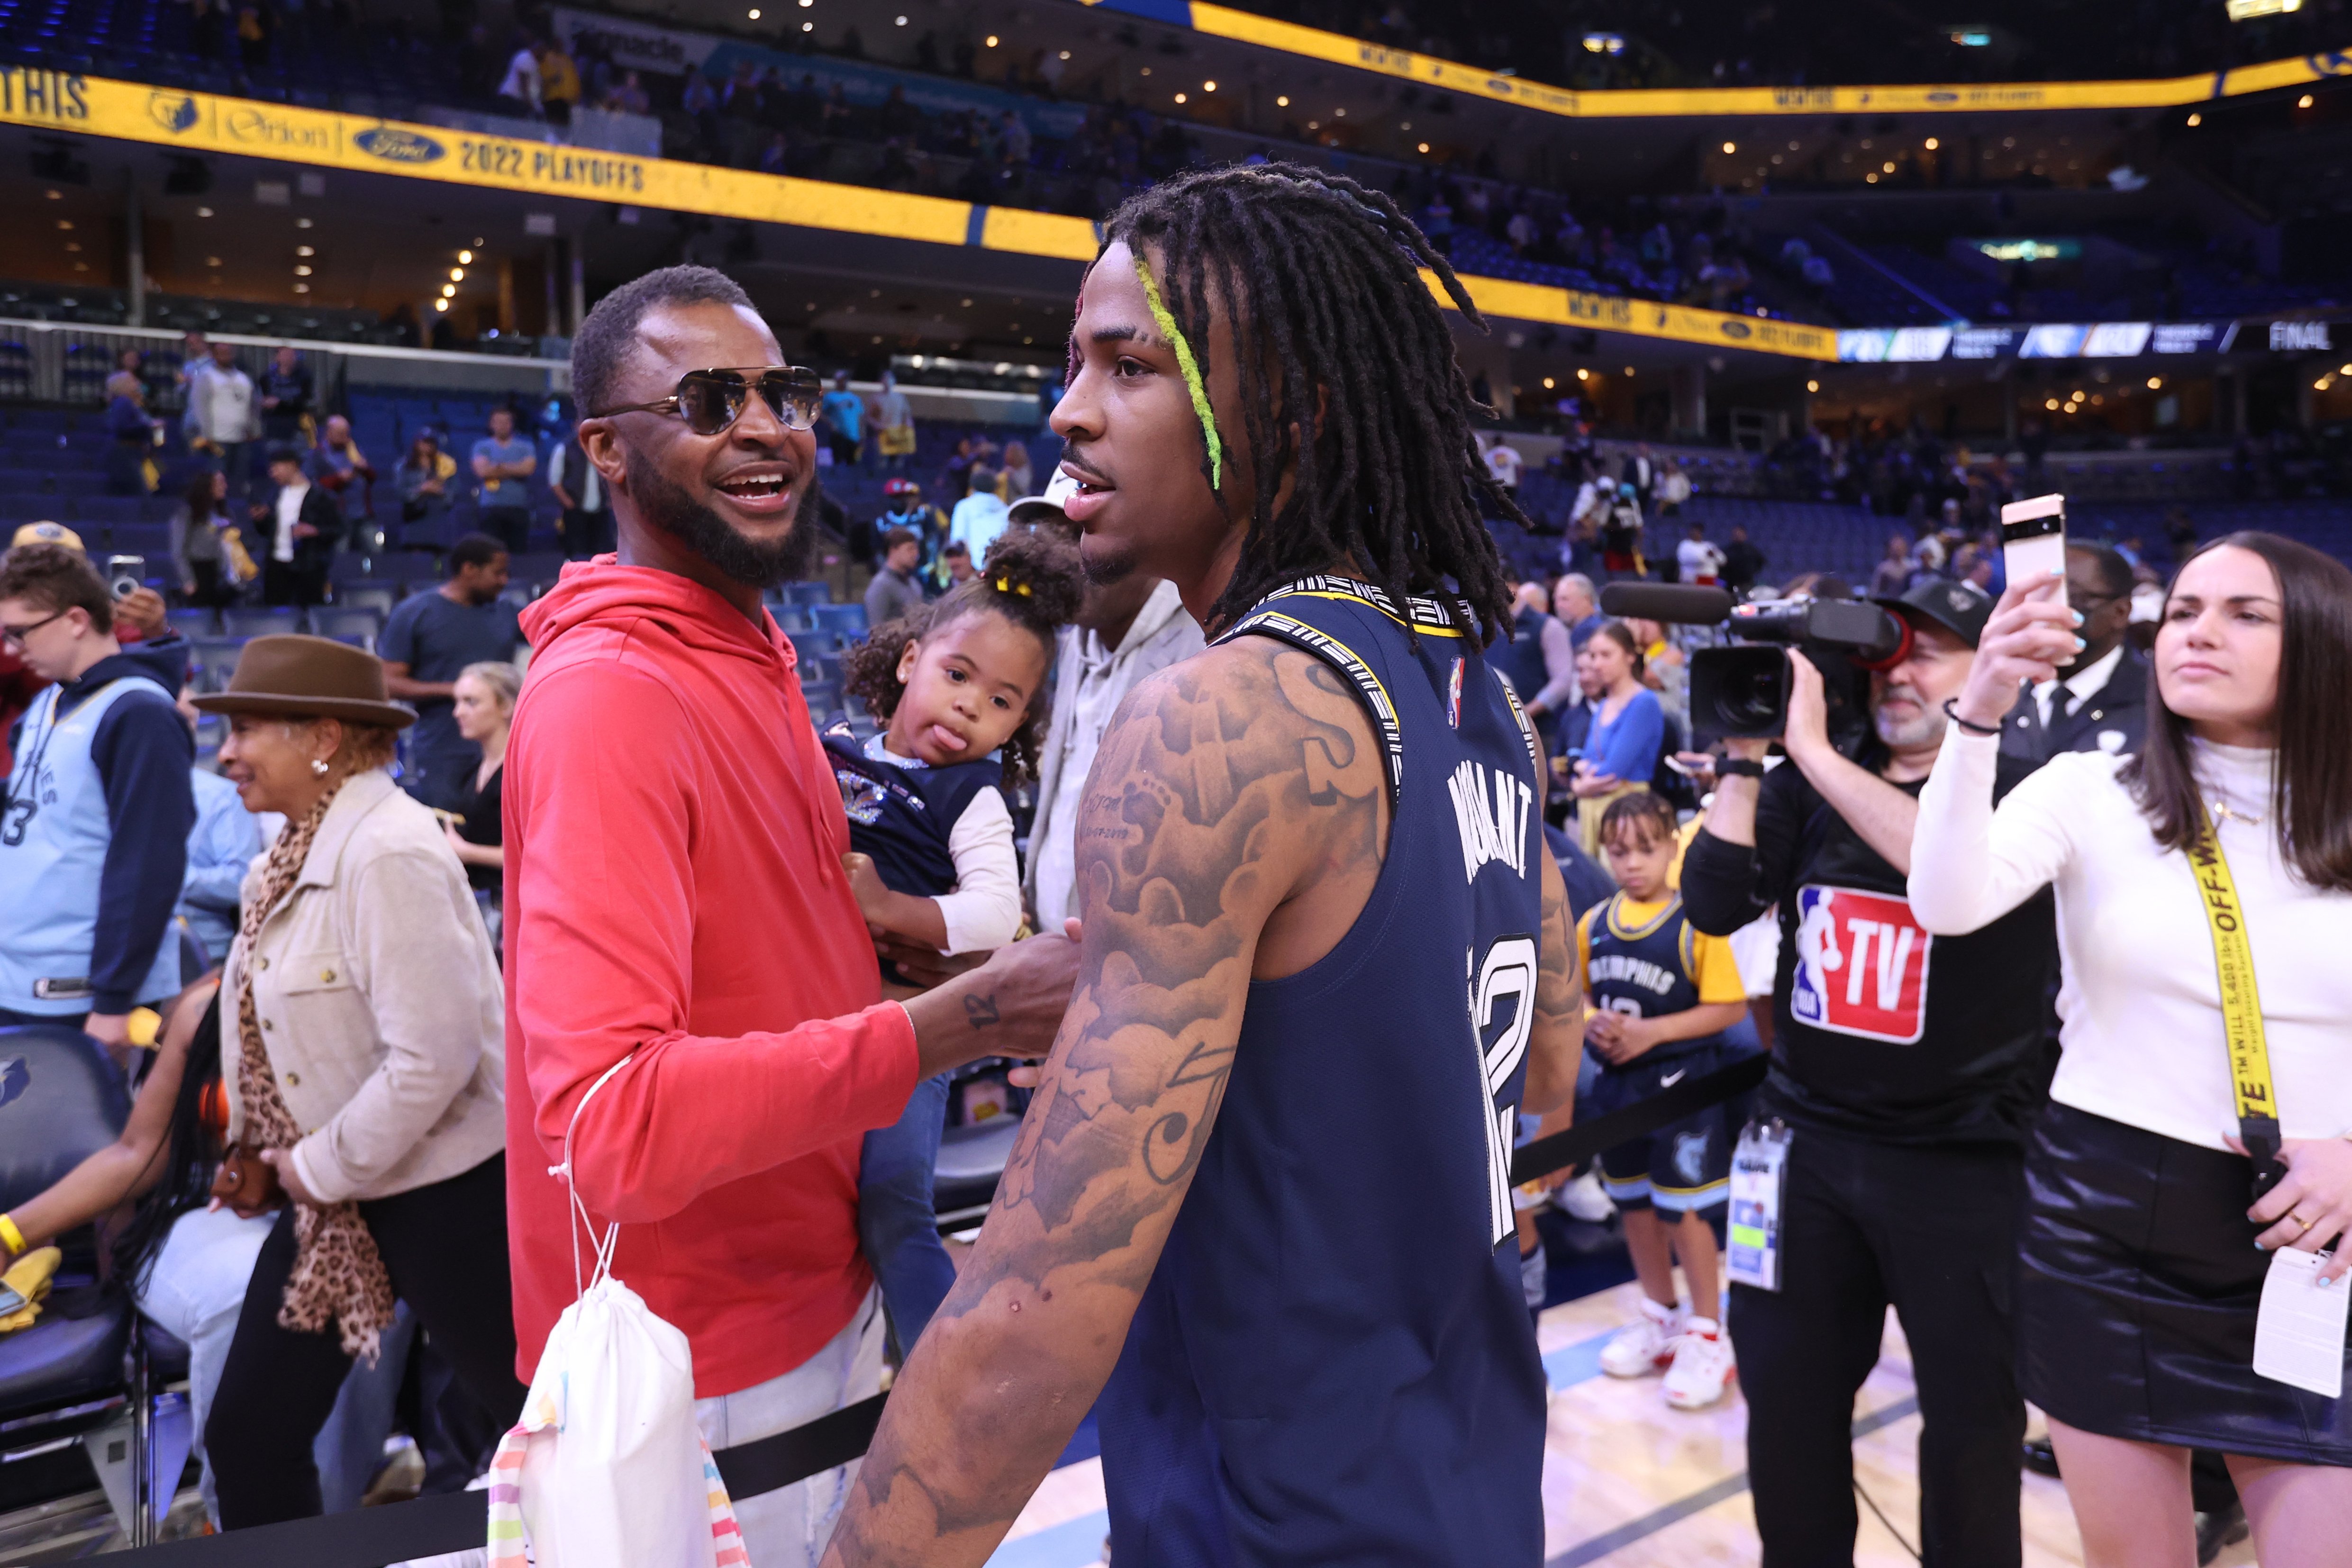 Ja Morant and Tee Morant at a Grizzlies VS Minnesota Timberwolves Game 2 of the NBA Playoffs on April 19, 2022, at FedExForum in Memphis, Tennessee. | Source: Getty Images